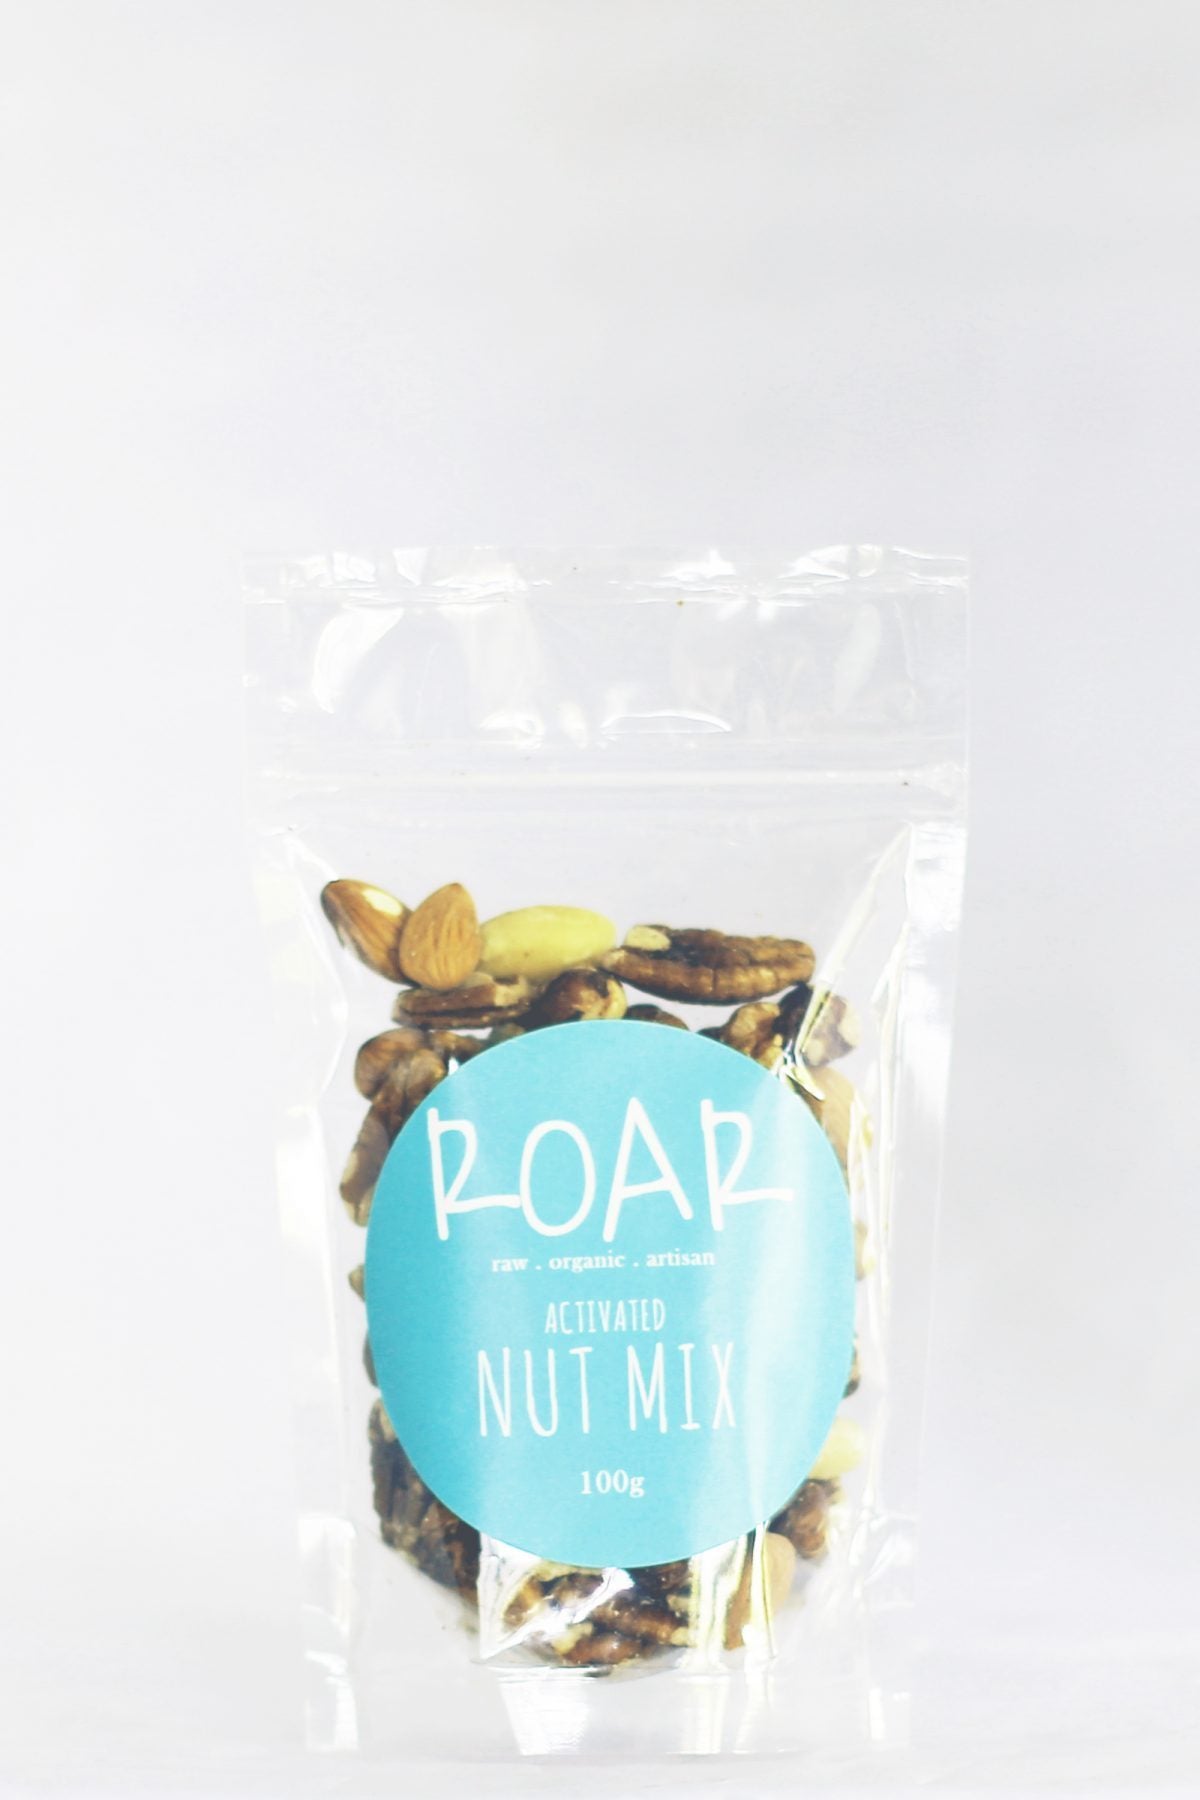 Roar Nut Mix Activated 100g